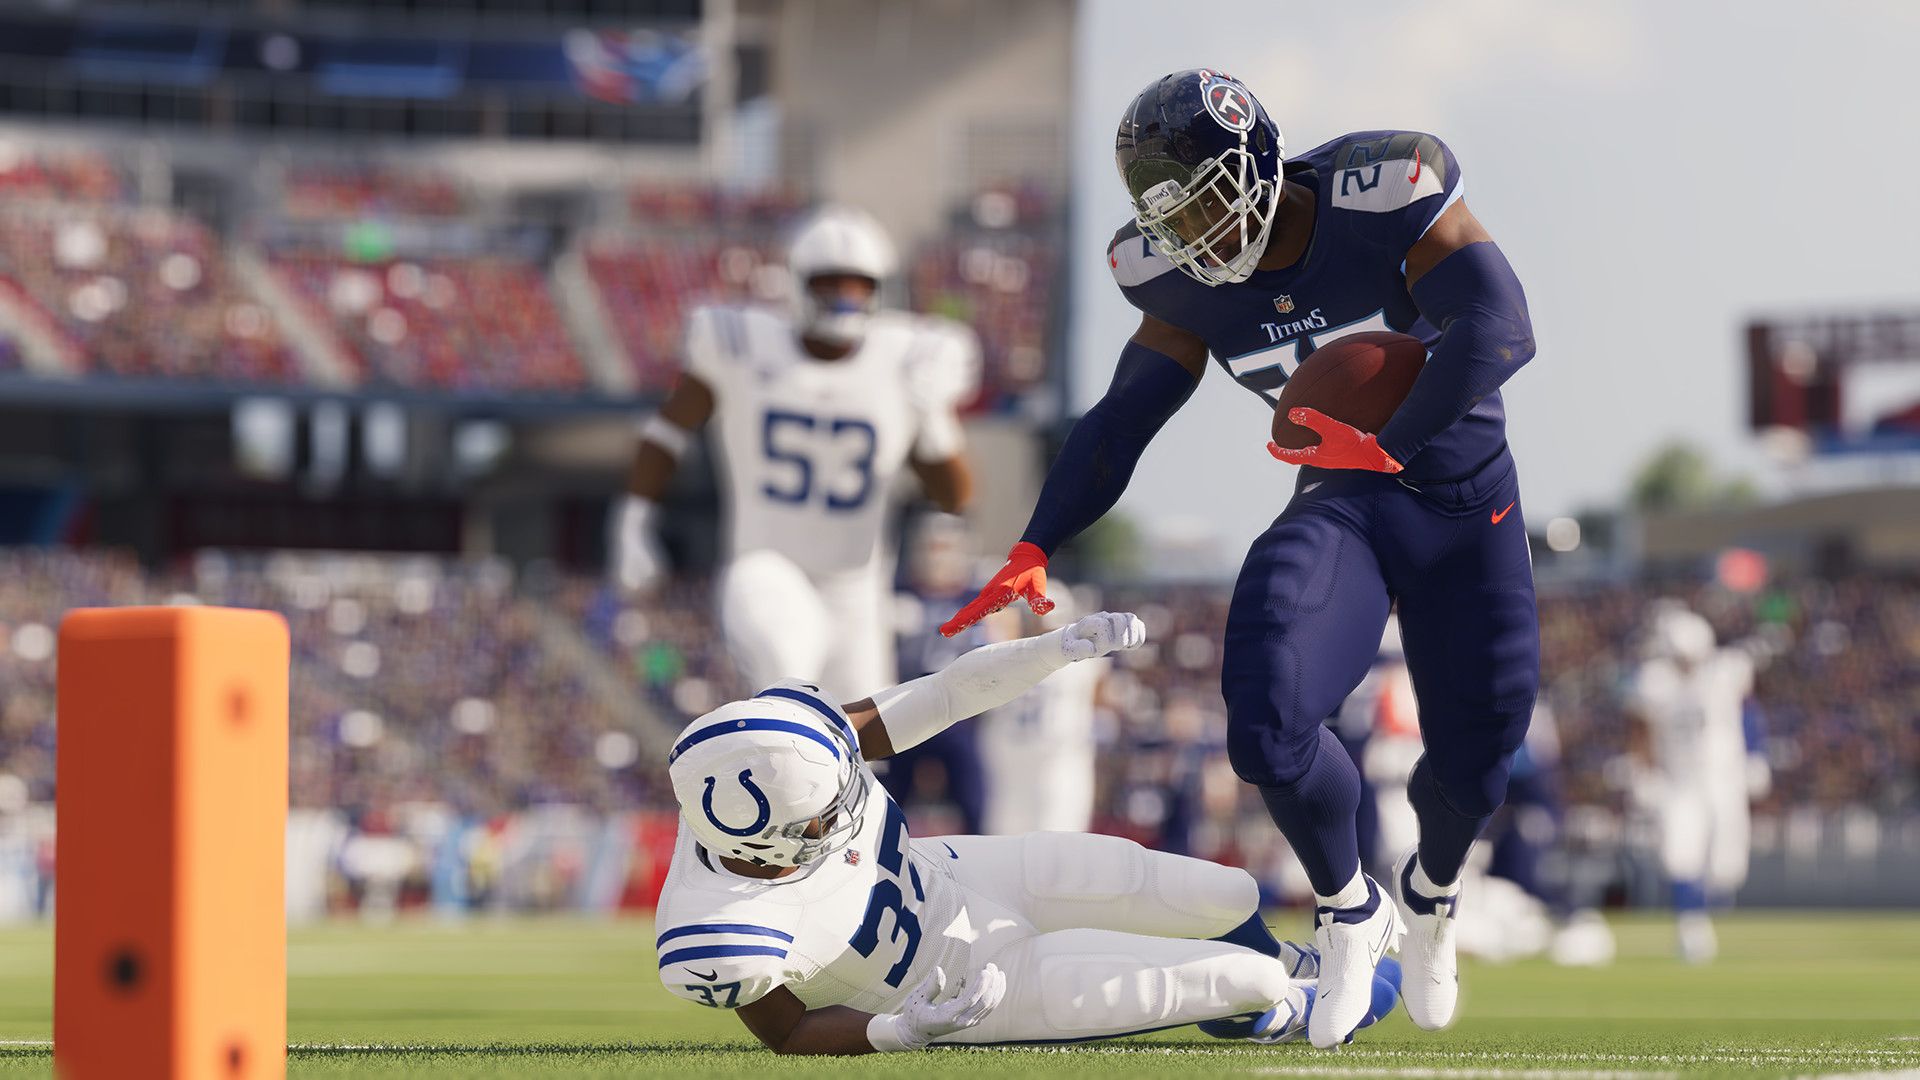 In this article, we are going to be covering Madden 23 ratings of the top 10 players for every position, so you know which are the best in the game.